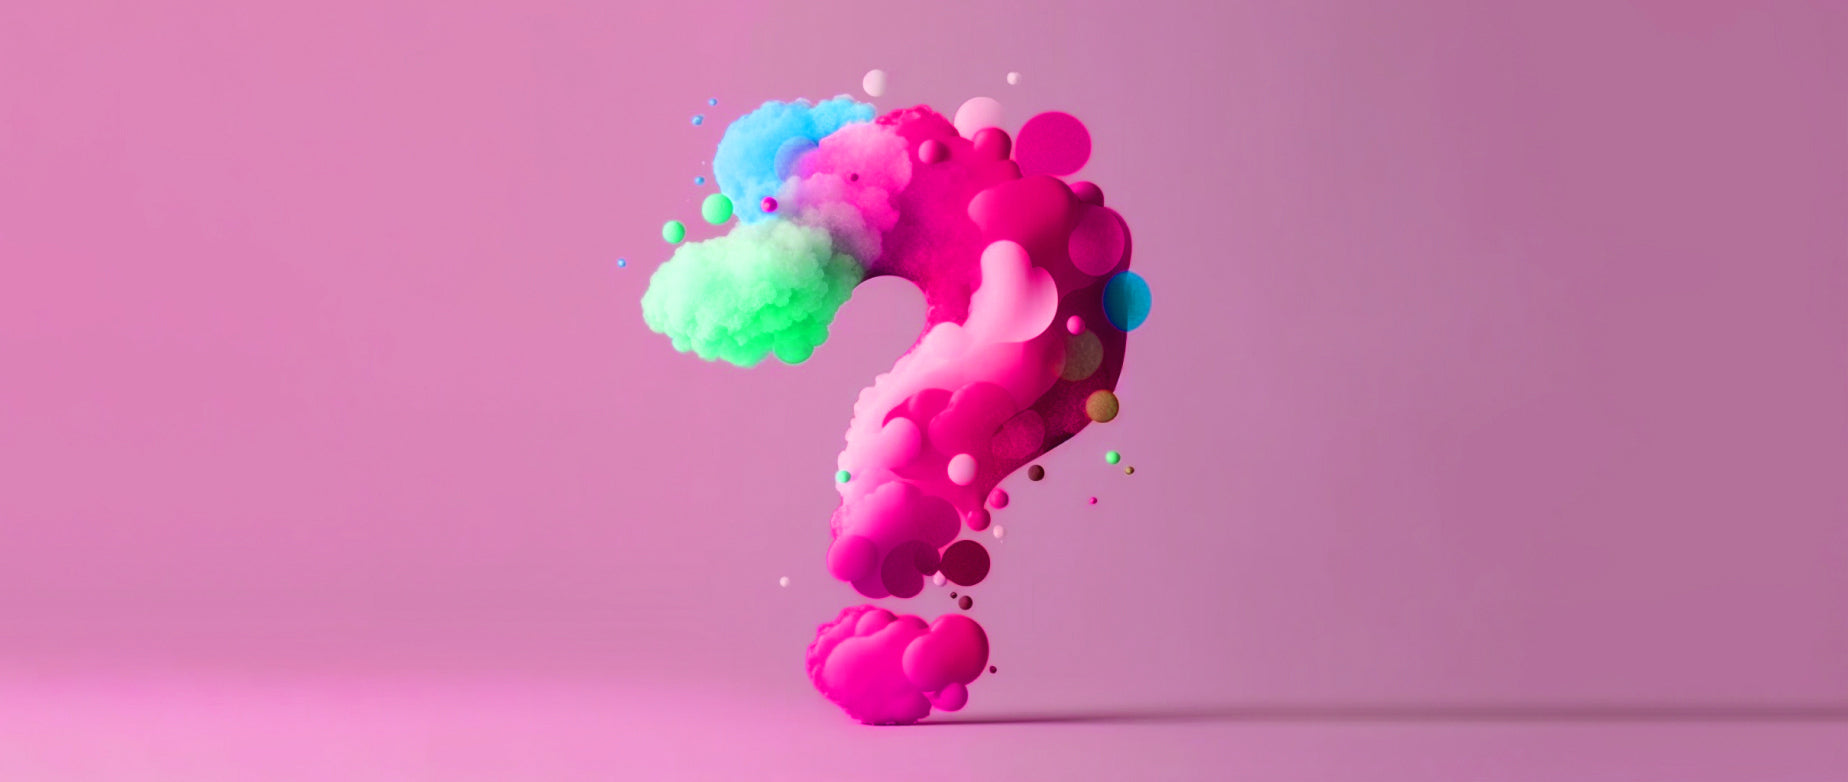 a question mark of colorful fluffy clouds on a pink background